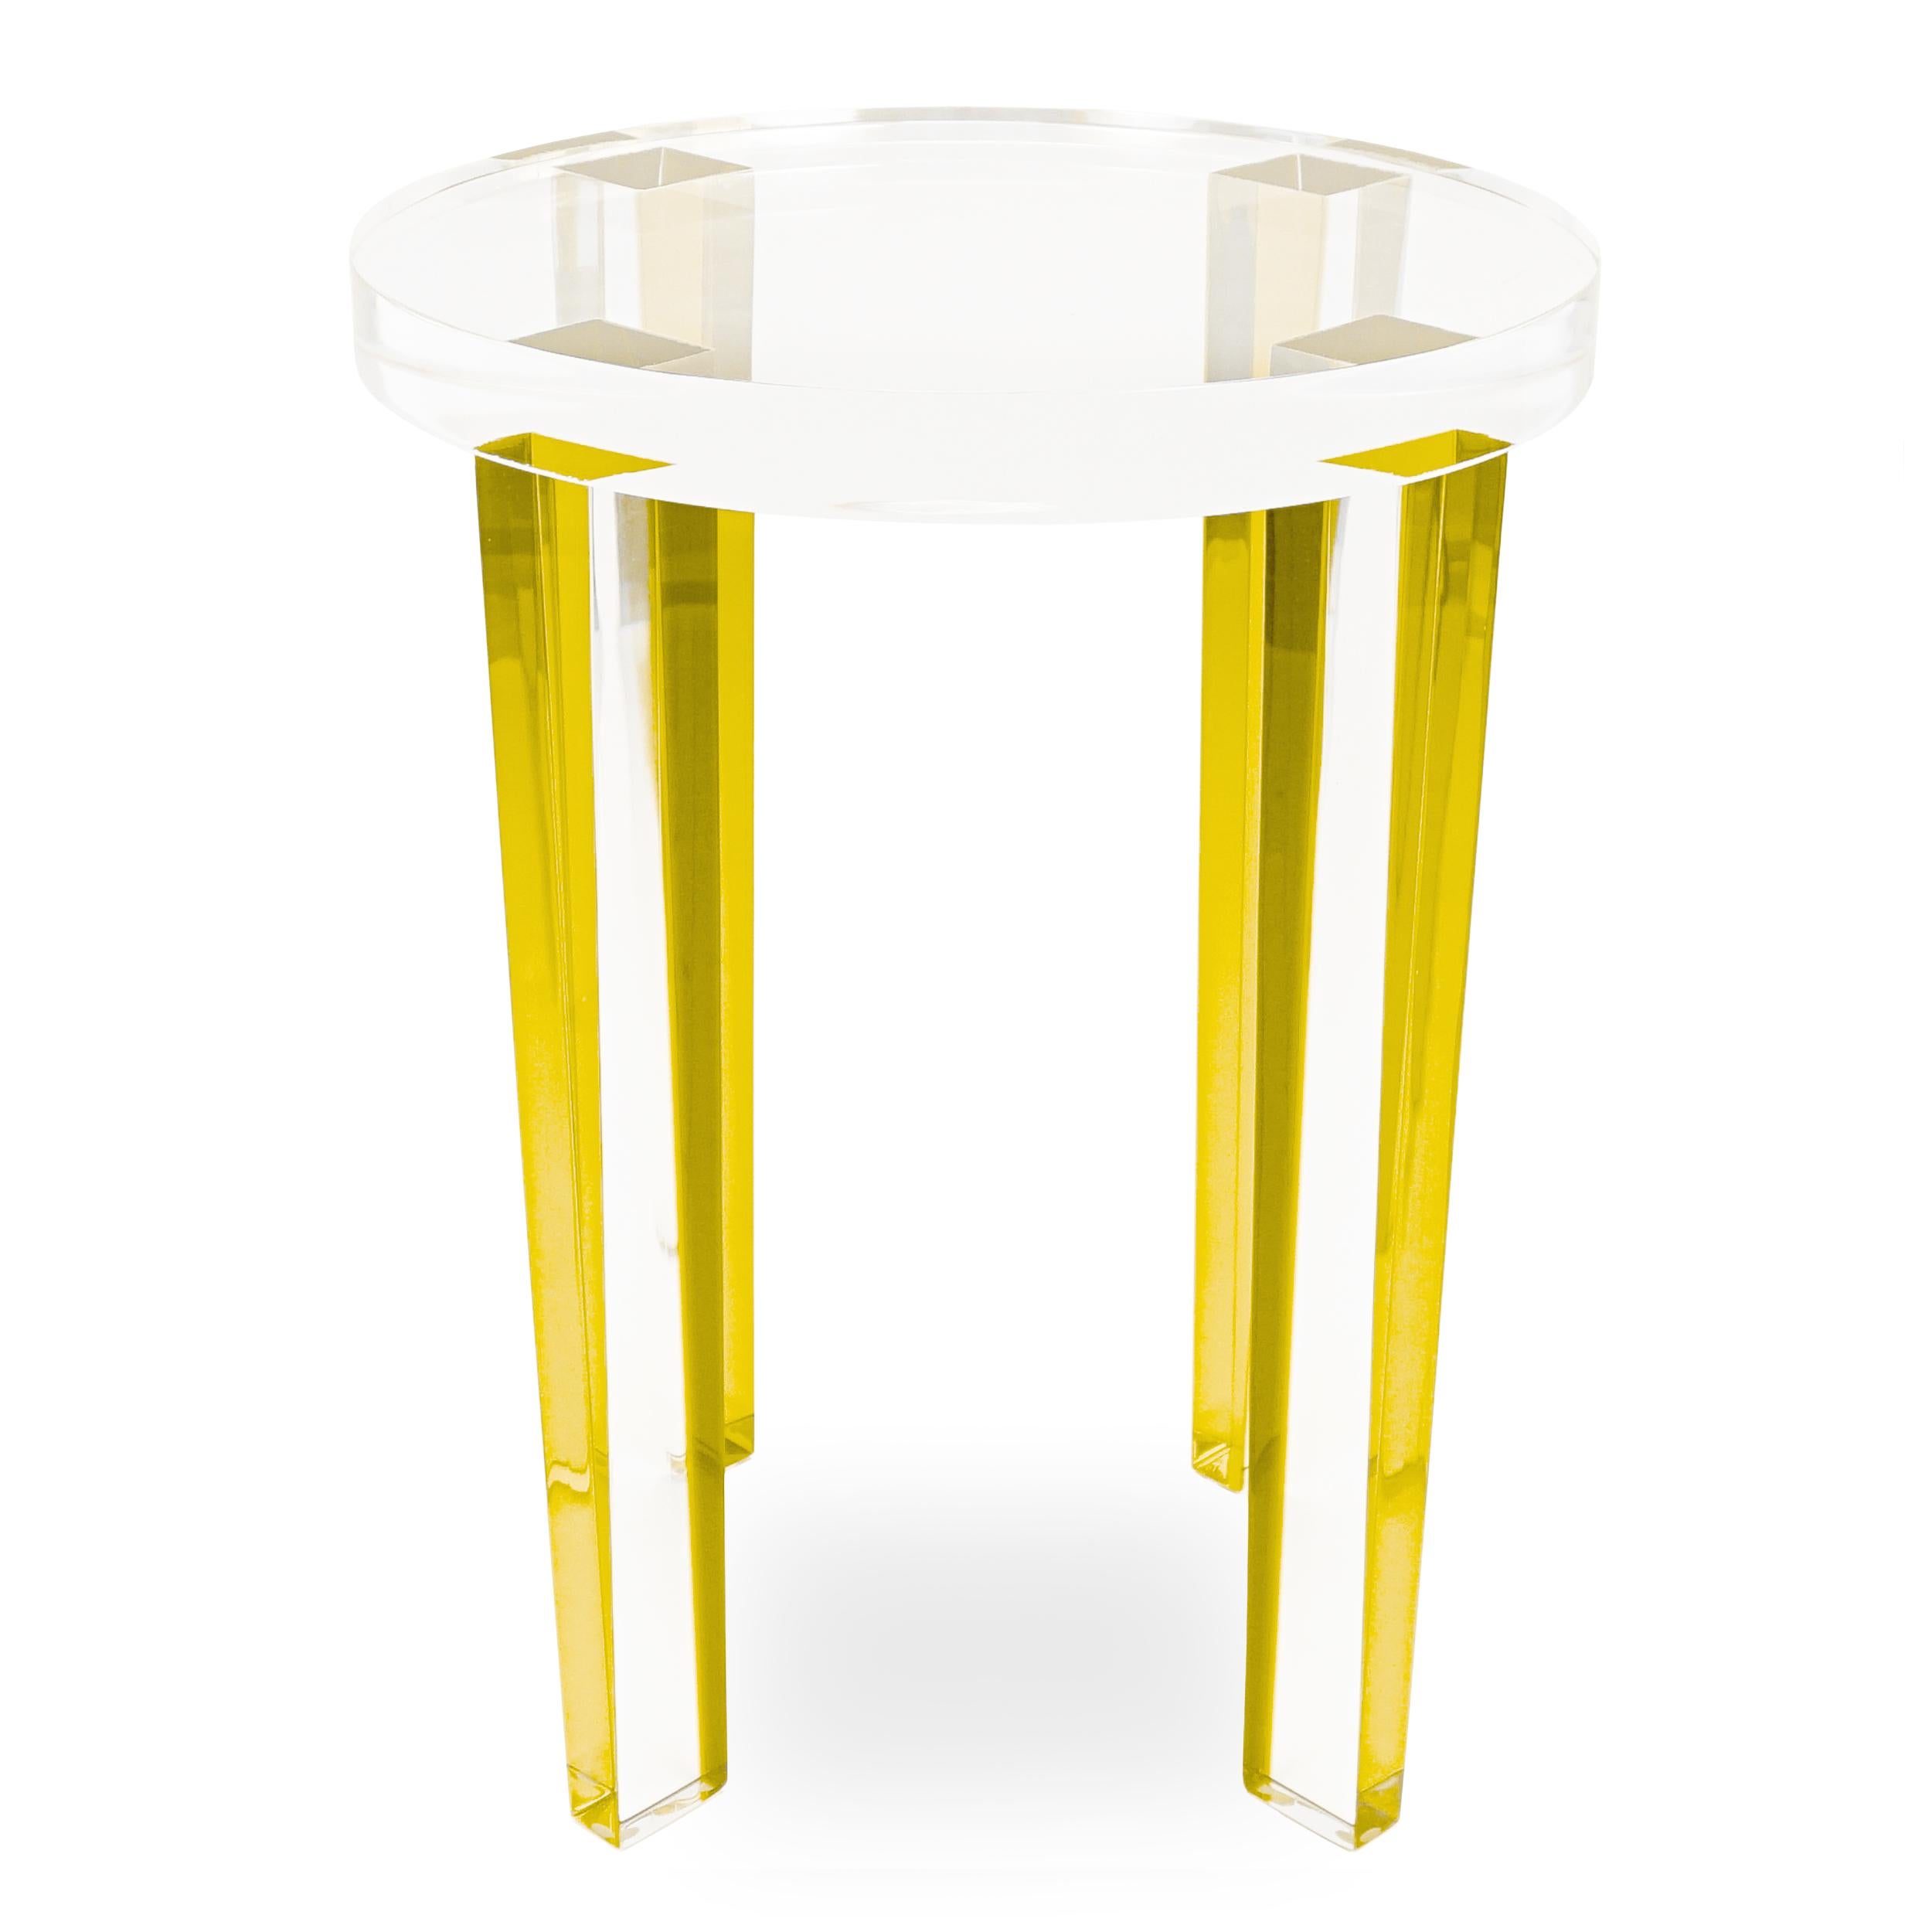 This round lucite side table has been built with yellow colored Lucite legs and a clear Lucite top. This little side table will reflect light and create a big impact.

Overall: 15”Dia. x 19”H

Price As Shown: $1,850 each

2023 - Available Right Now